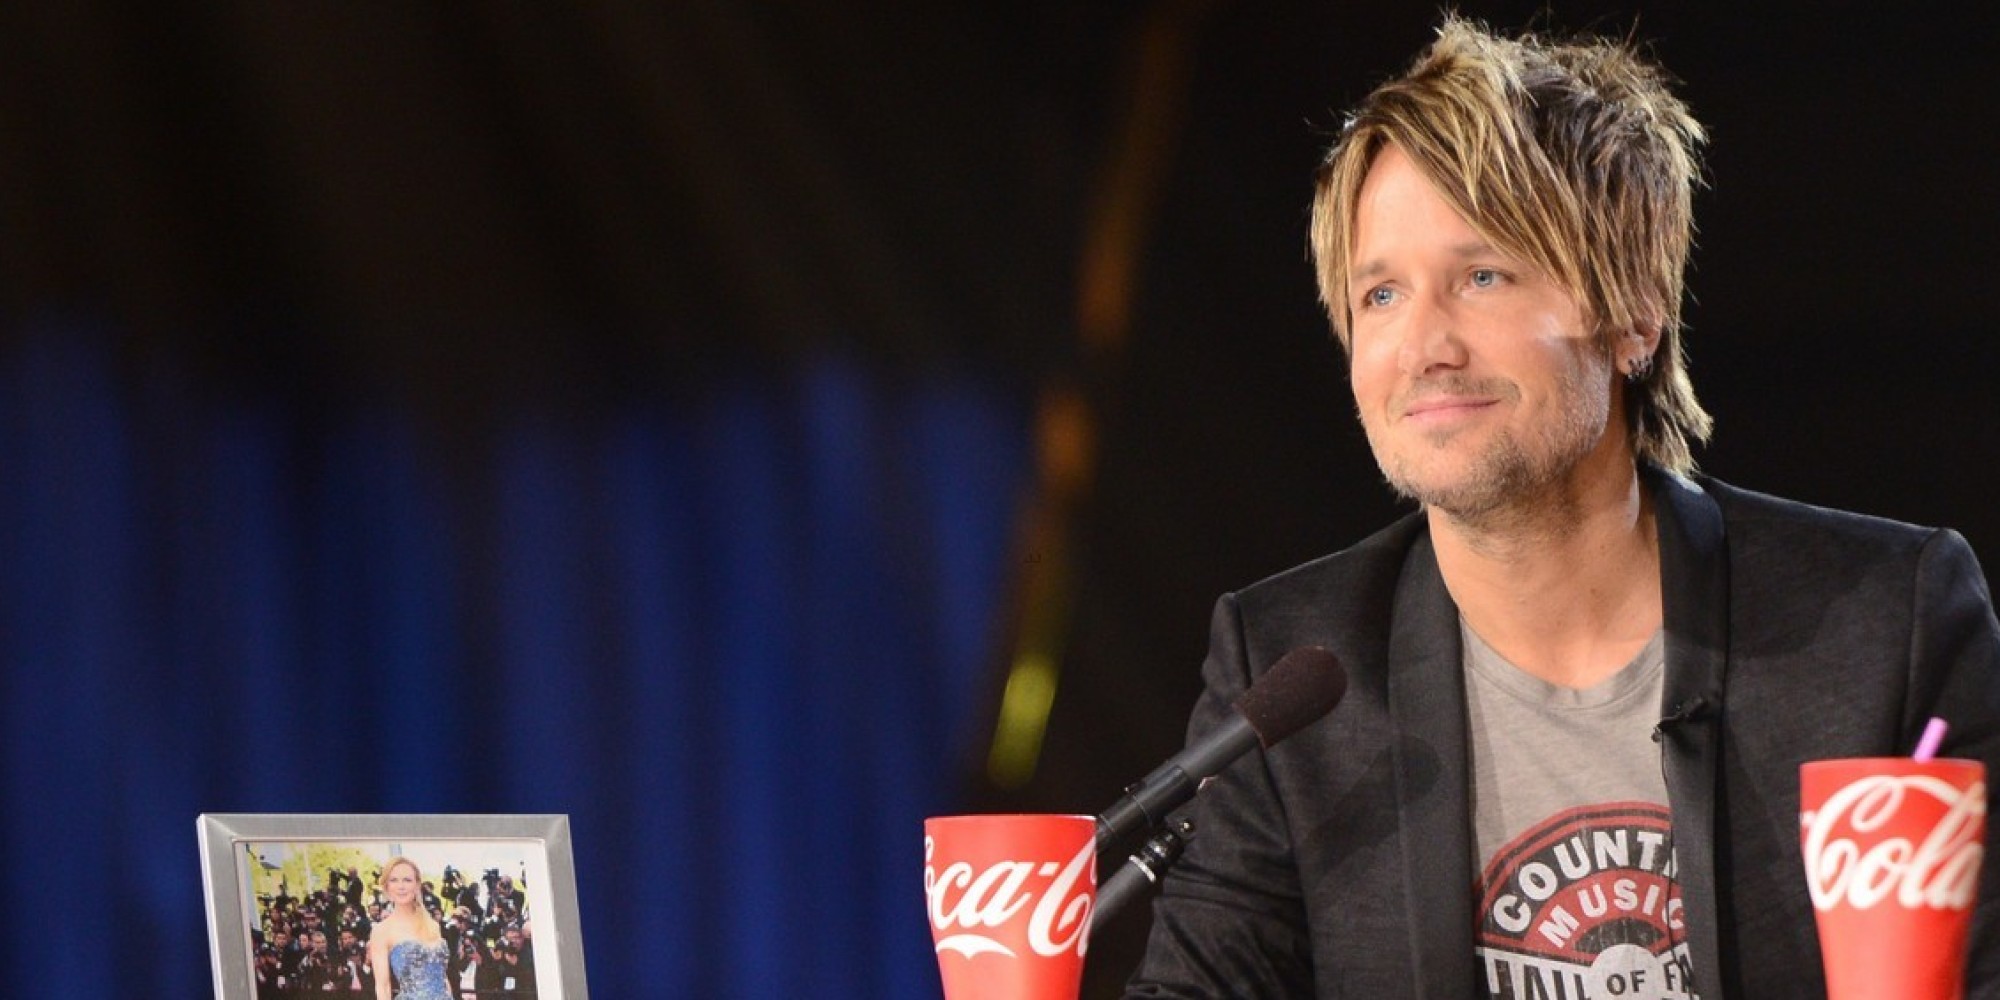 Keith Urban Gets Candid About His Relationship With Nicole Kidman On 'Idol'